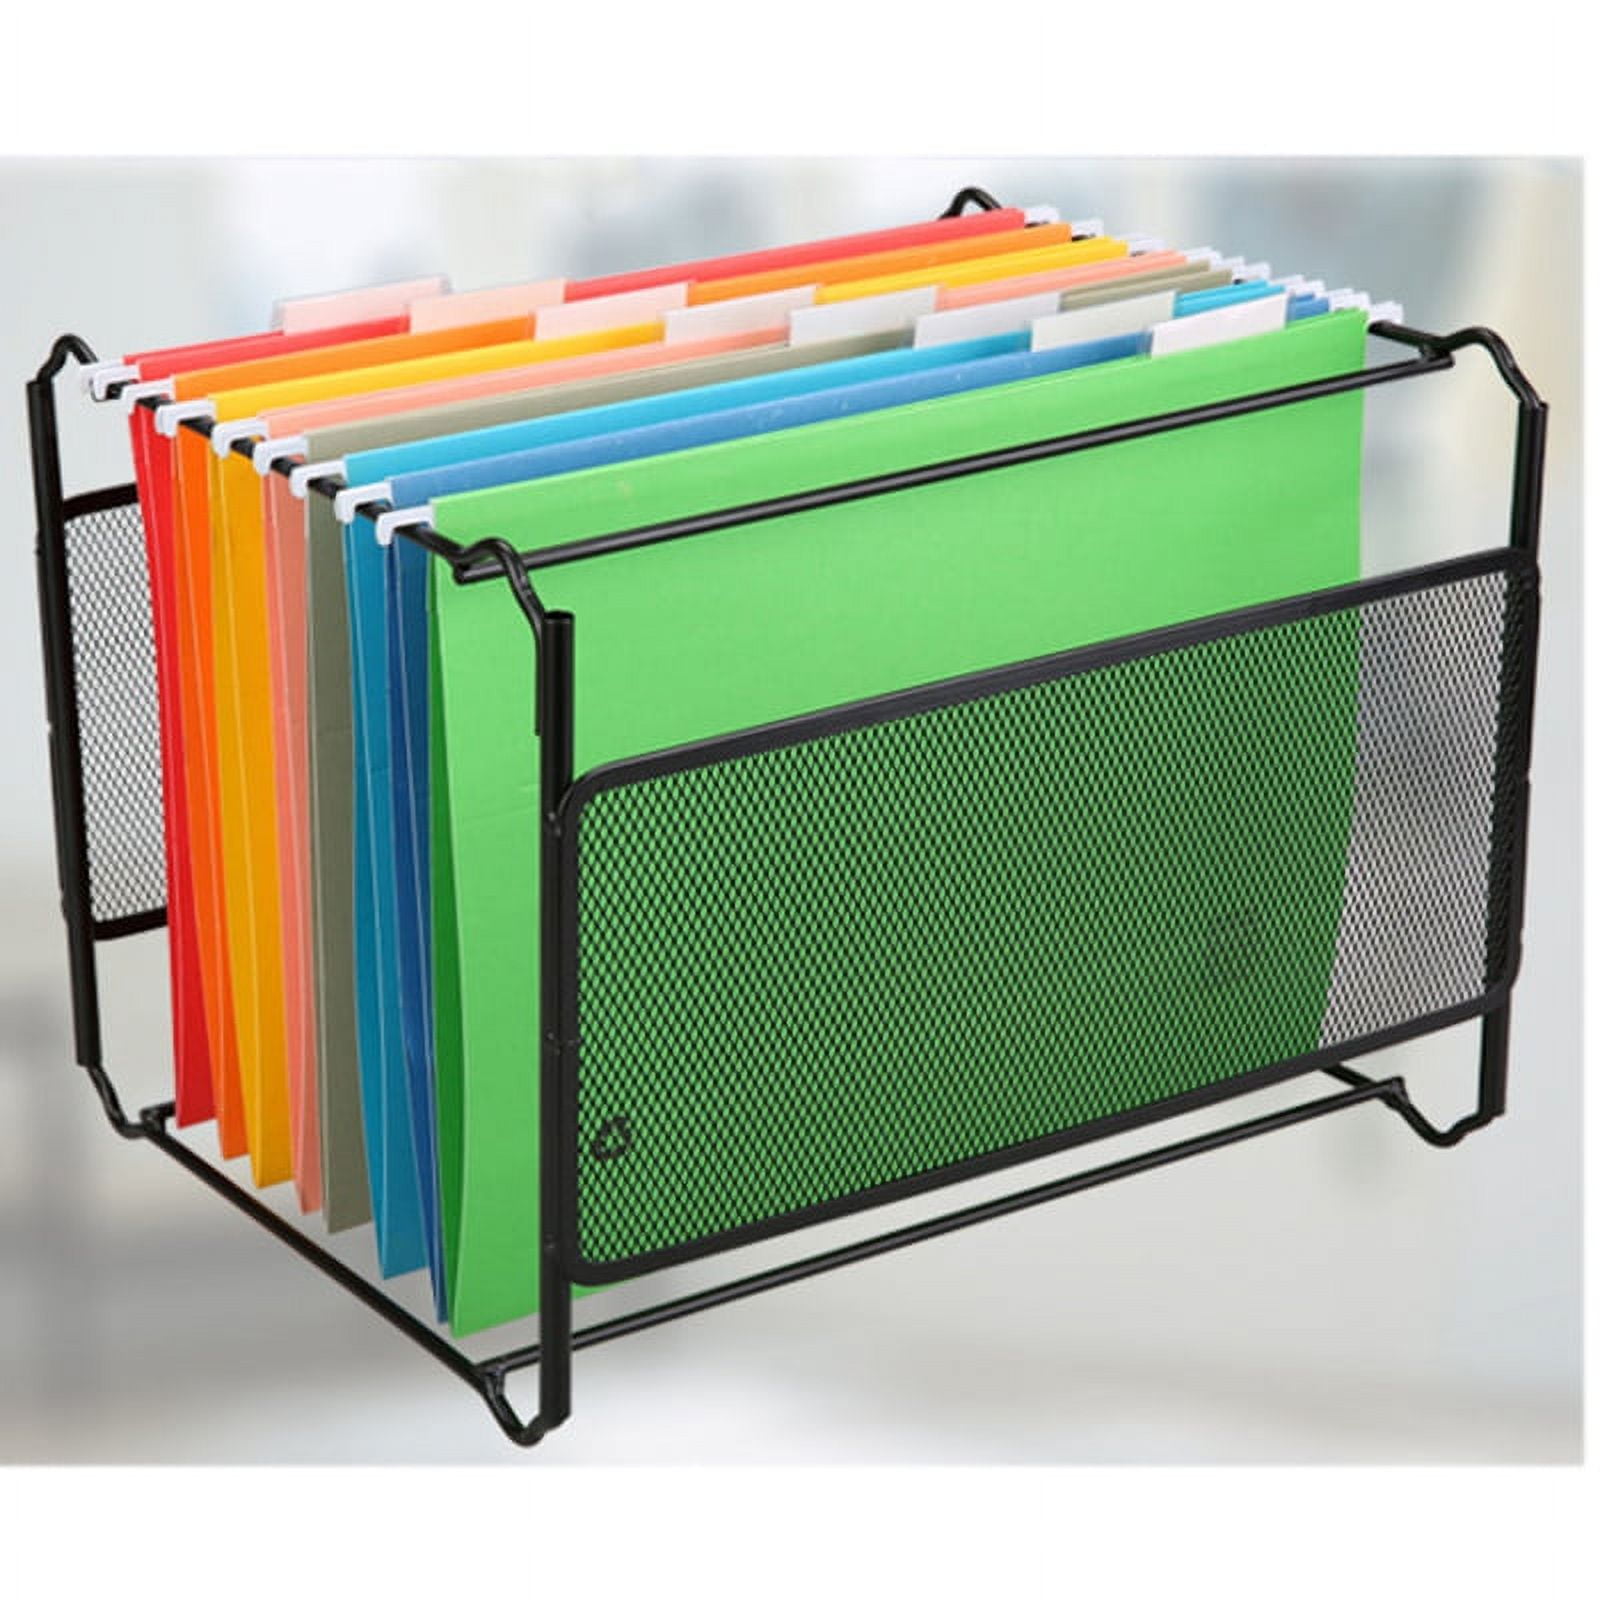 YBM Home Vertical File Bins Organizer Open Front Design for Easy Access to  Files, Documents, and Magazines, Ideal for Home Office, Work Desktops, or  School, Medium, 1260-8 